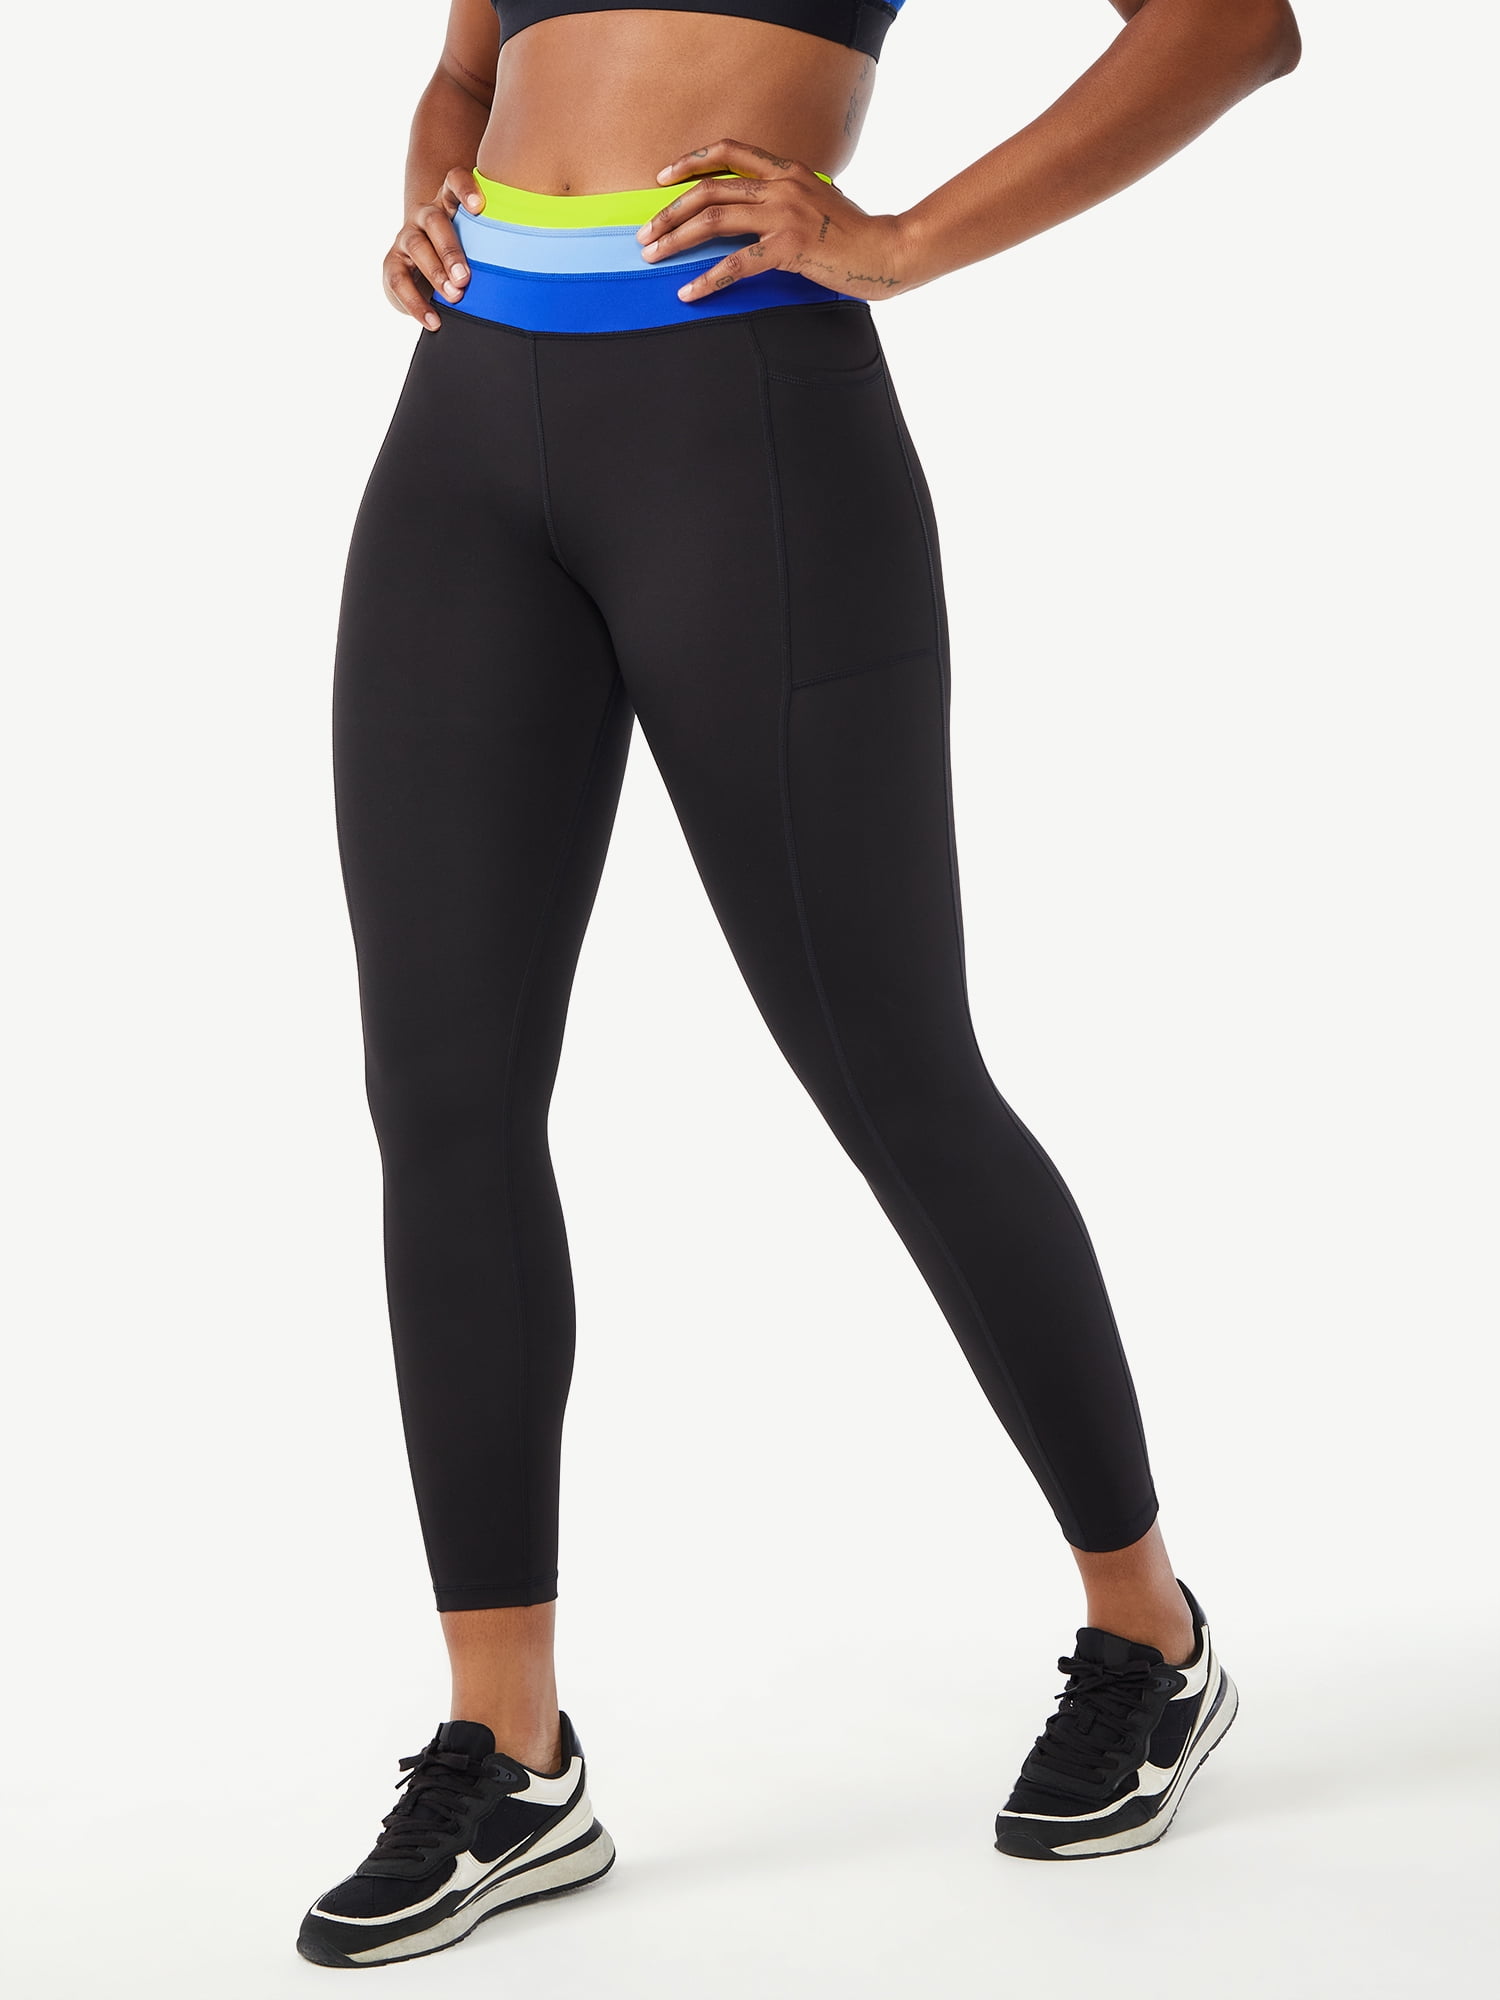 The Best Leggings for Working Out & Laying Around